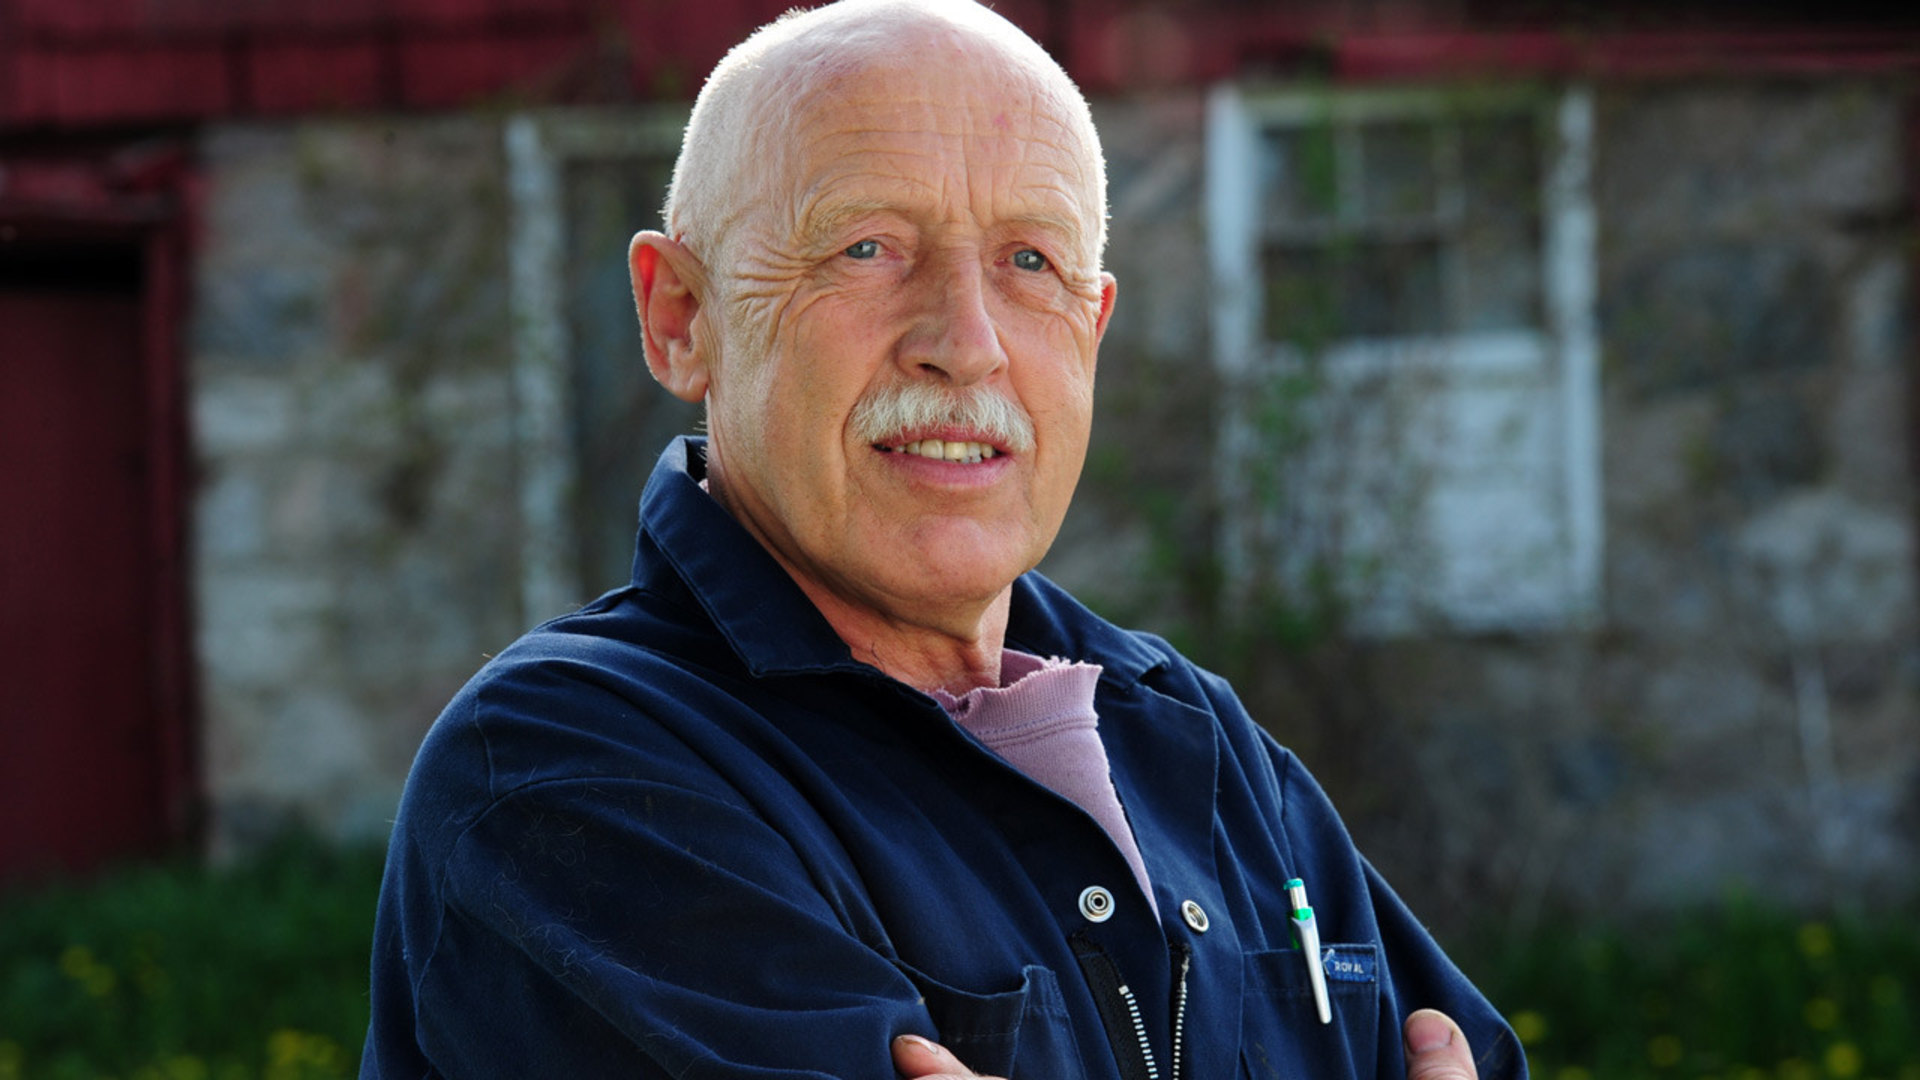 the-incredible-dr-pol-season-22-countdown-how-many-days-until-the